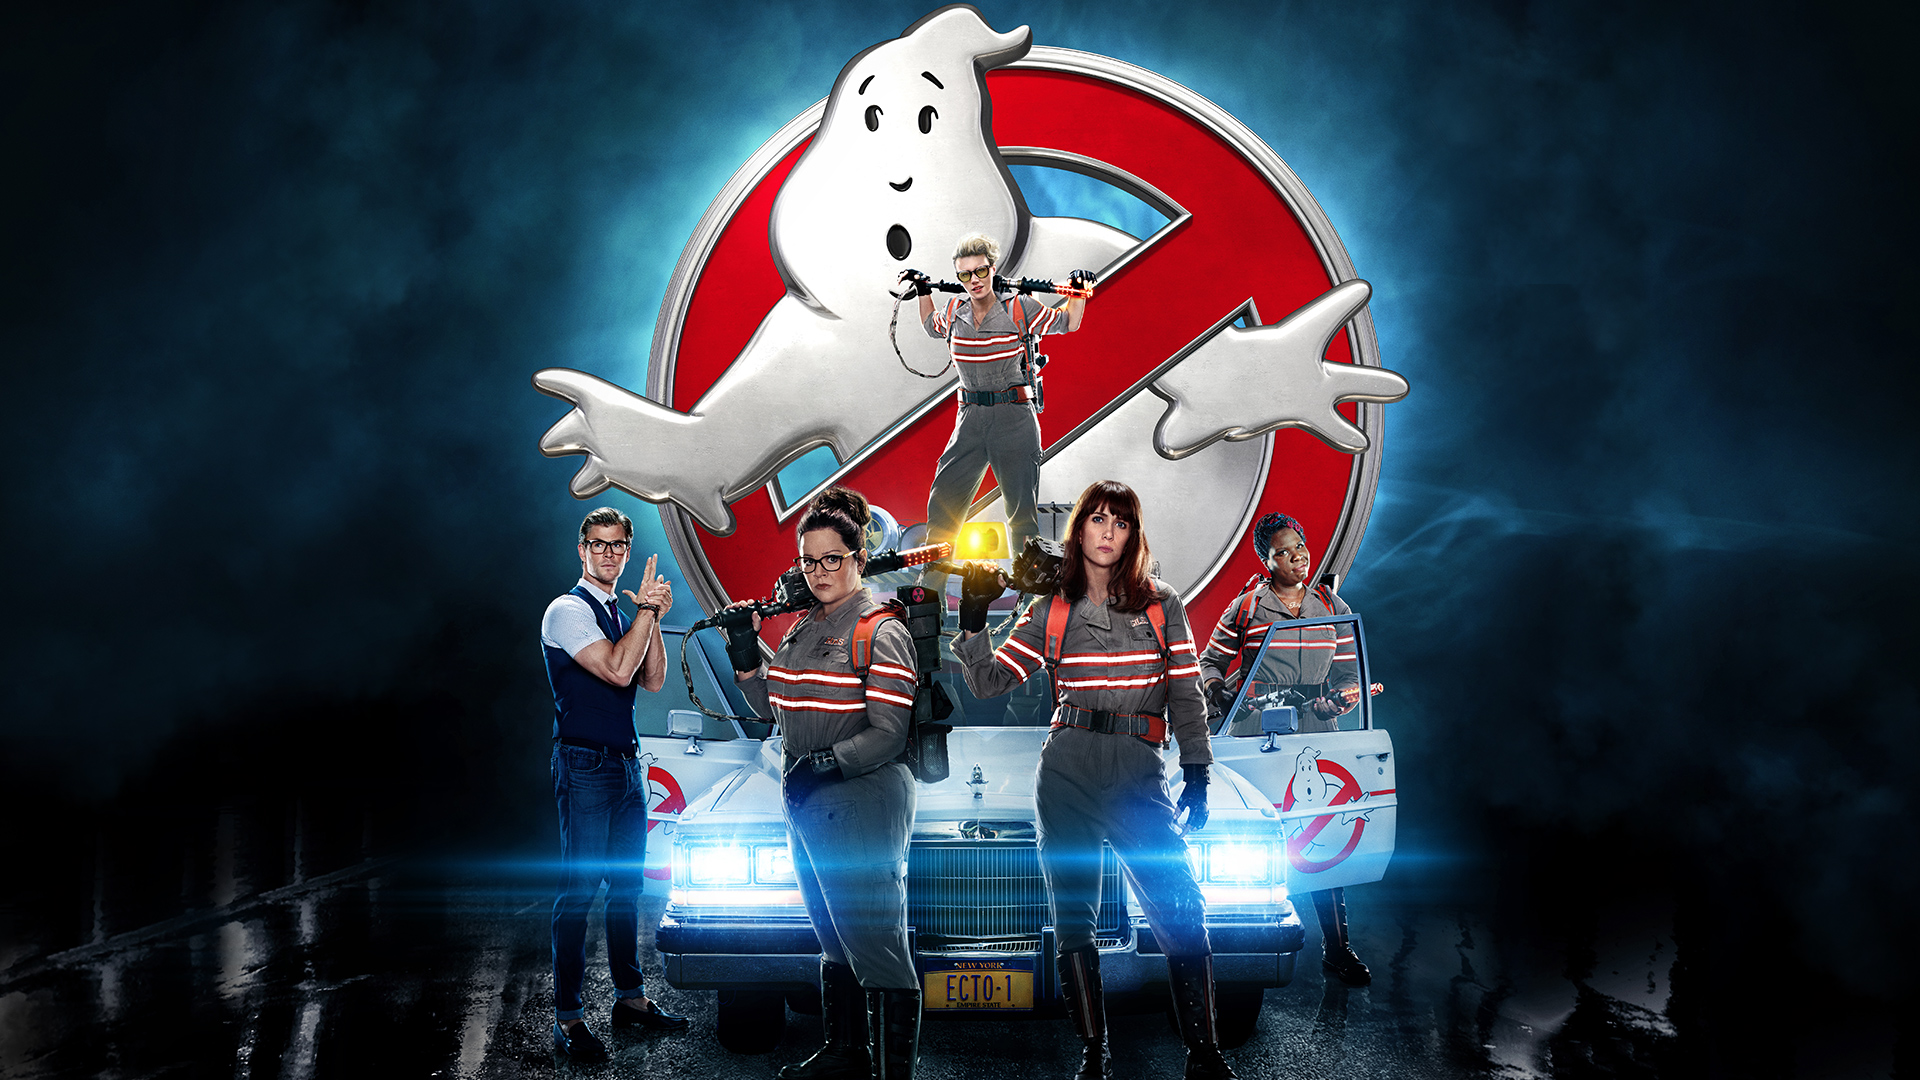 Movie Ghostbusters (2016) HD Wallpaper | Background Image